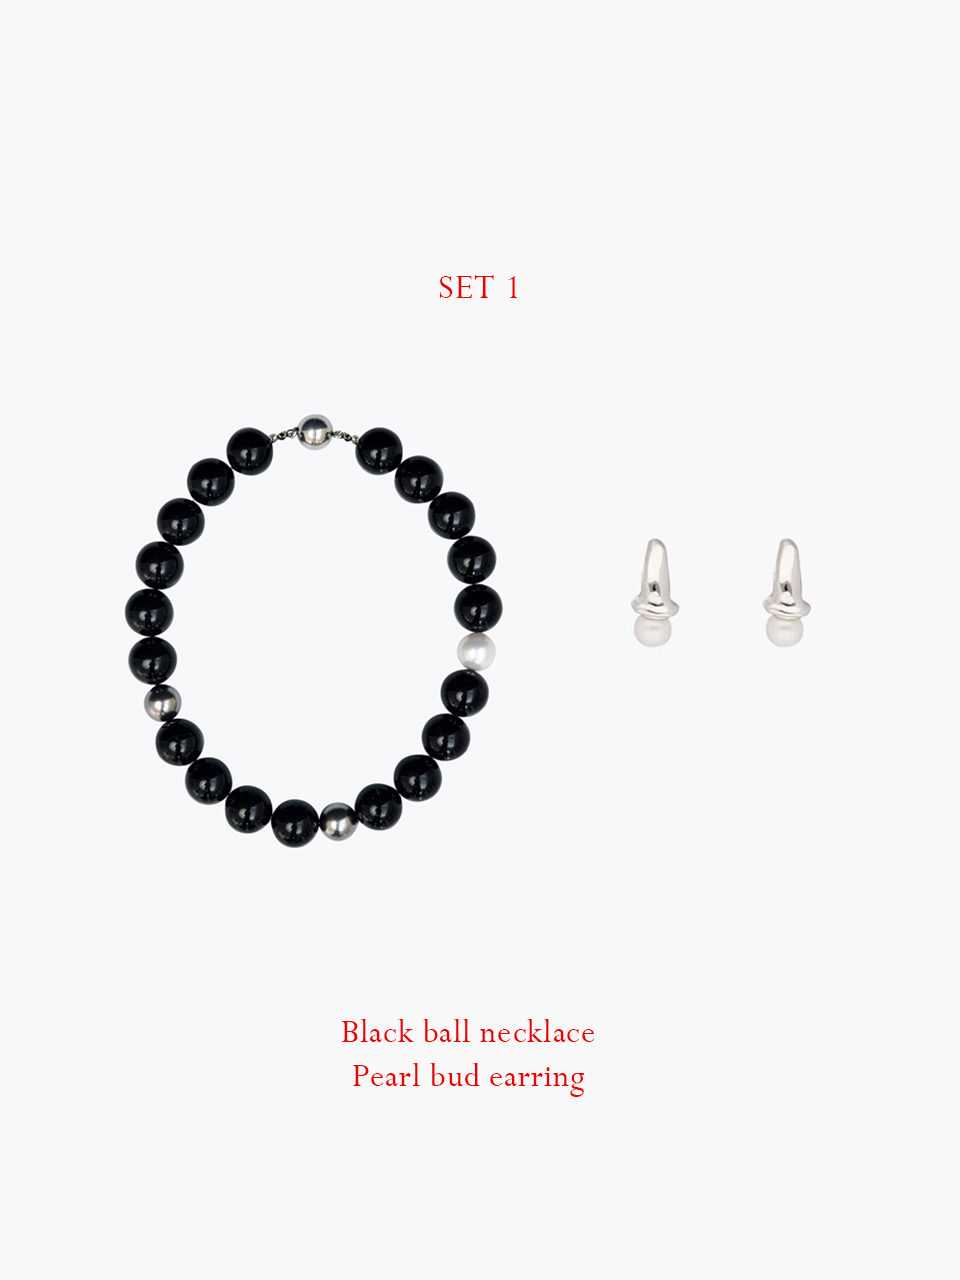 SET) Black ball necklace + Pearl bud earring